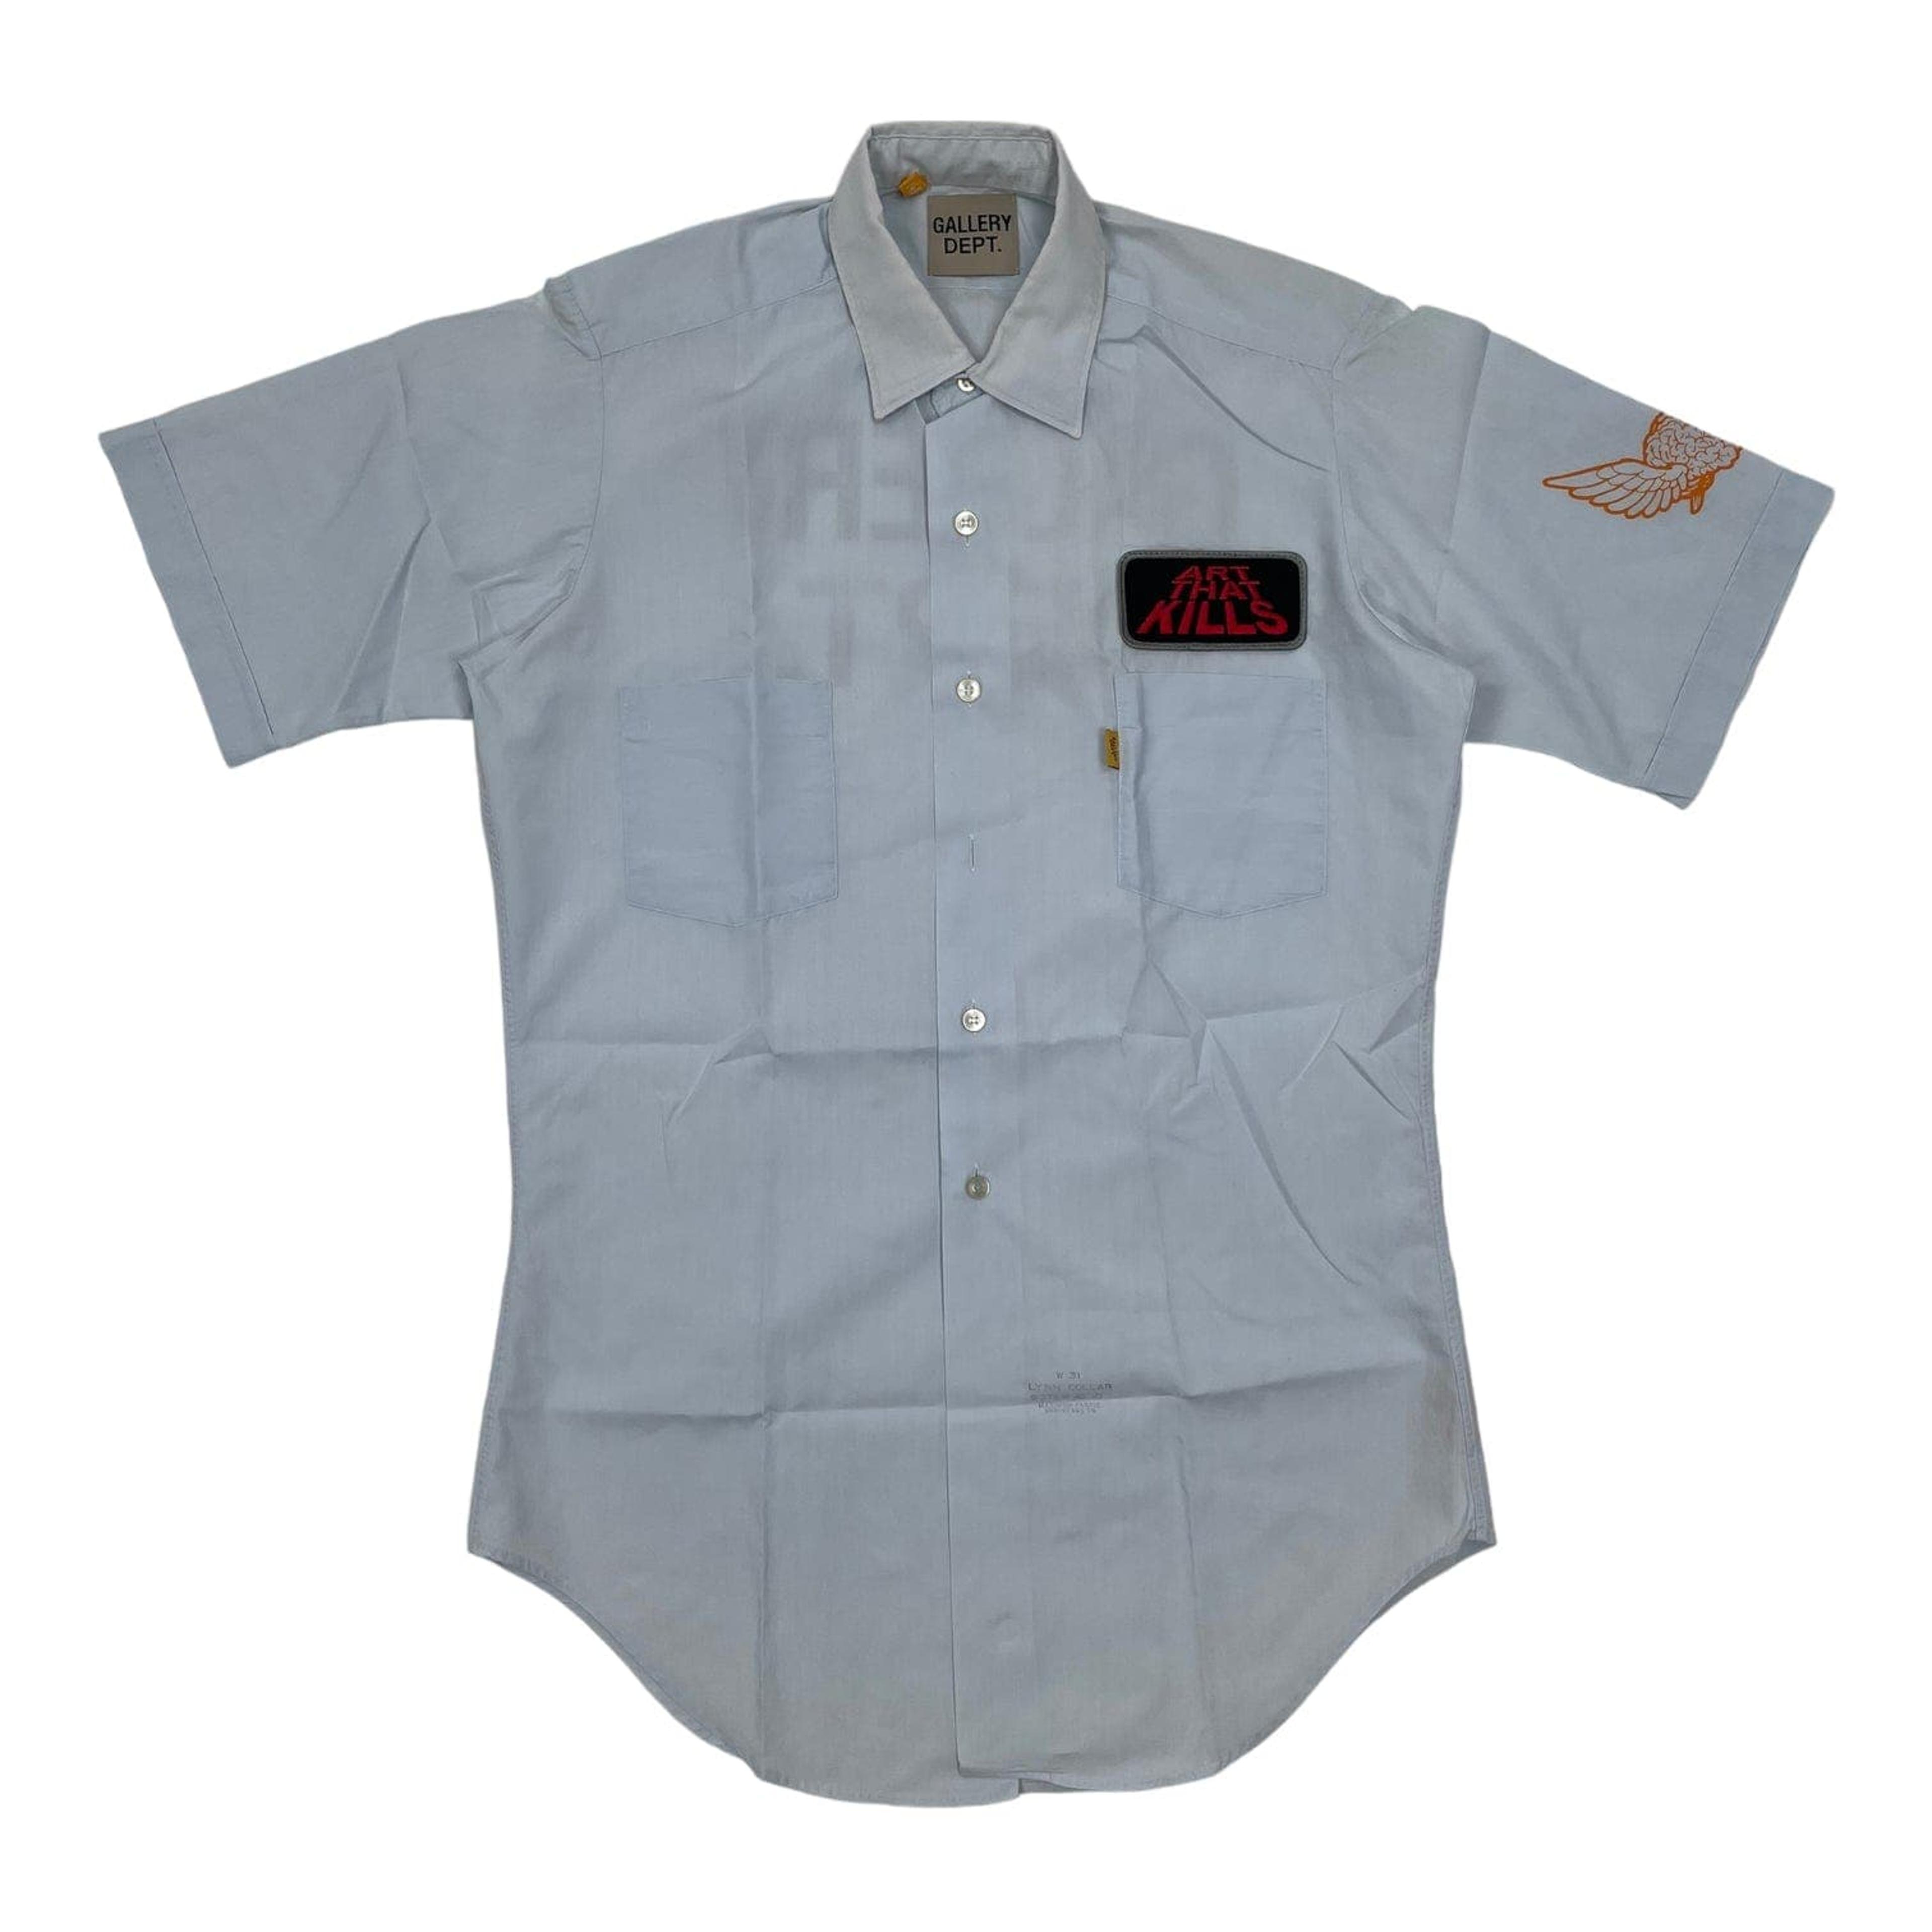 Gallery Department Vintage Mechanic Button Up Shirt Blue Pre-Own